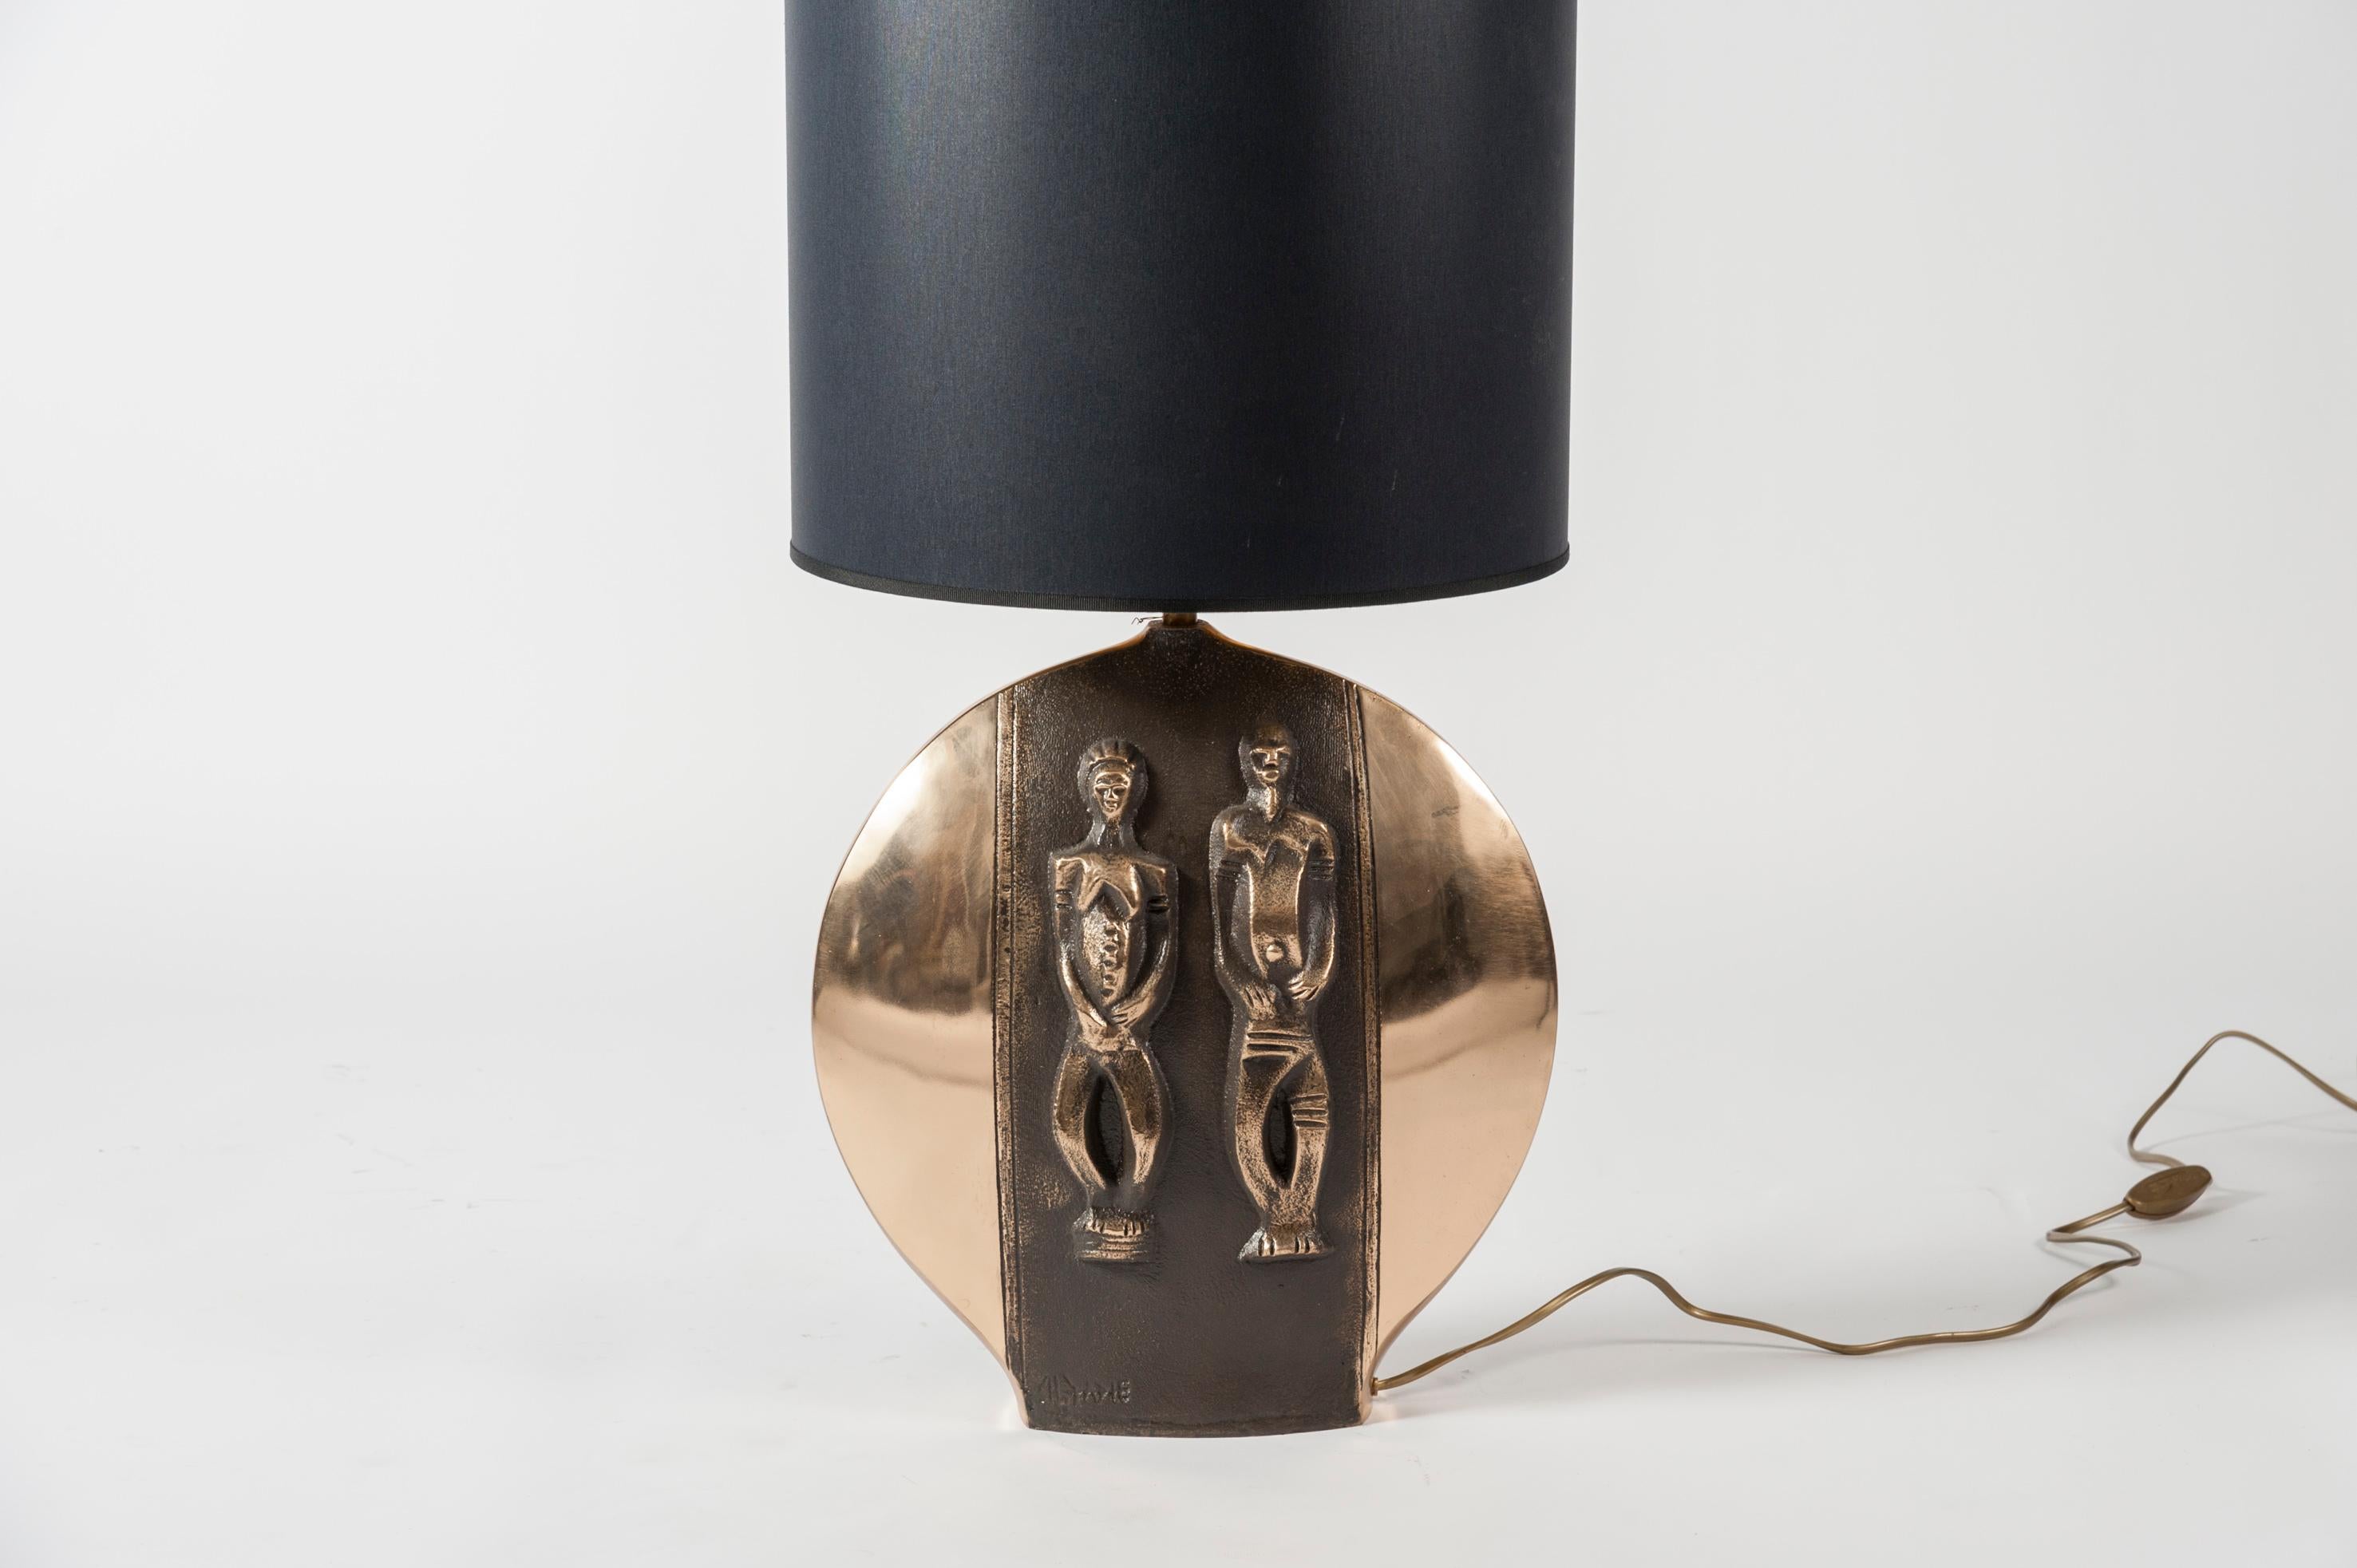 Bronze table lamp signed
Perfect condition
Dimensions given without shade
No shade provided.